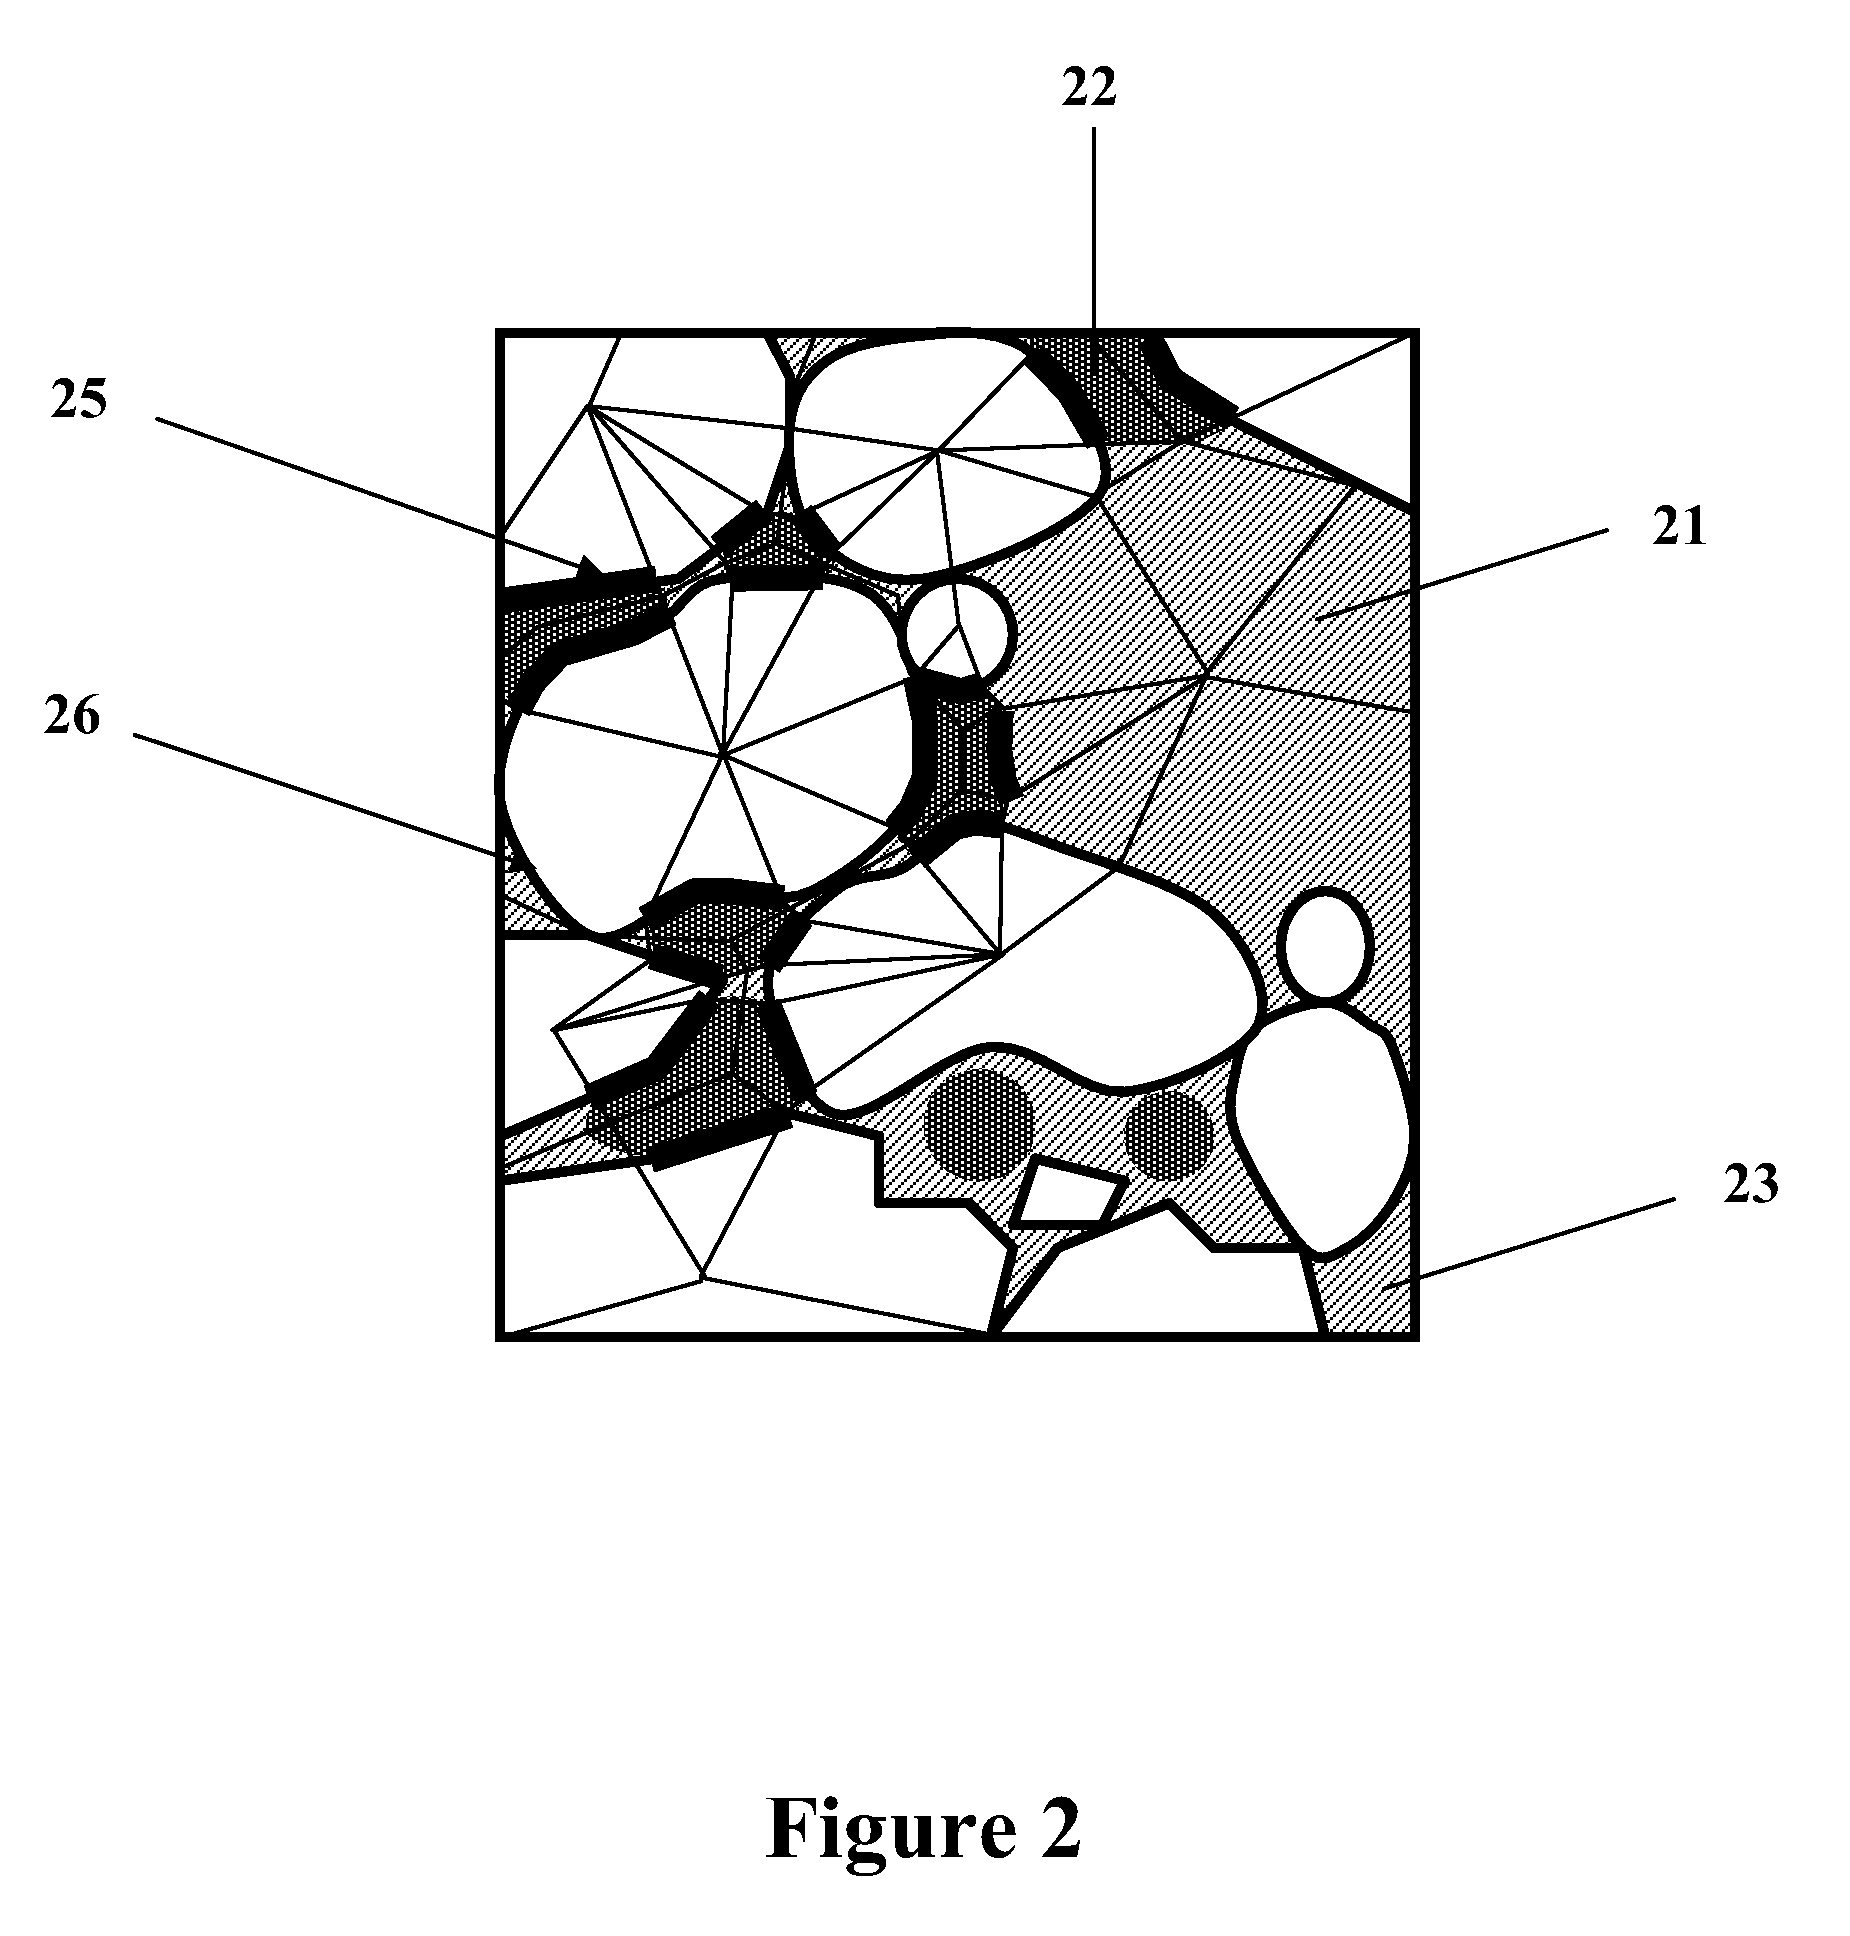 Method and apparatus for measuring the wettability of geological formations